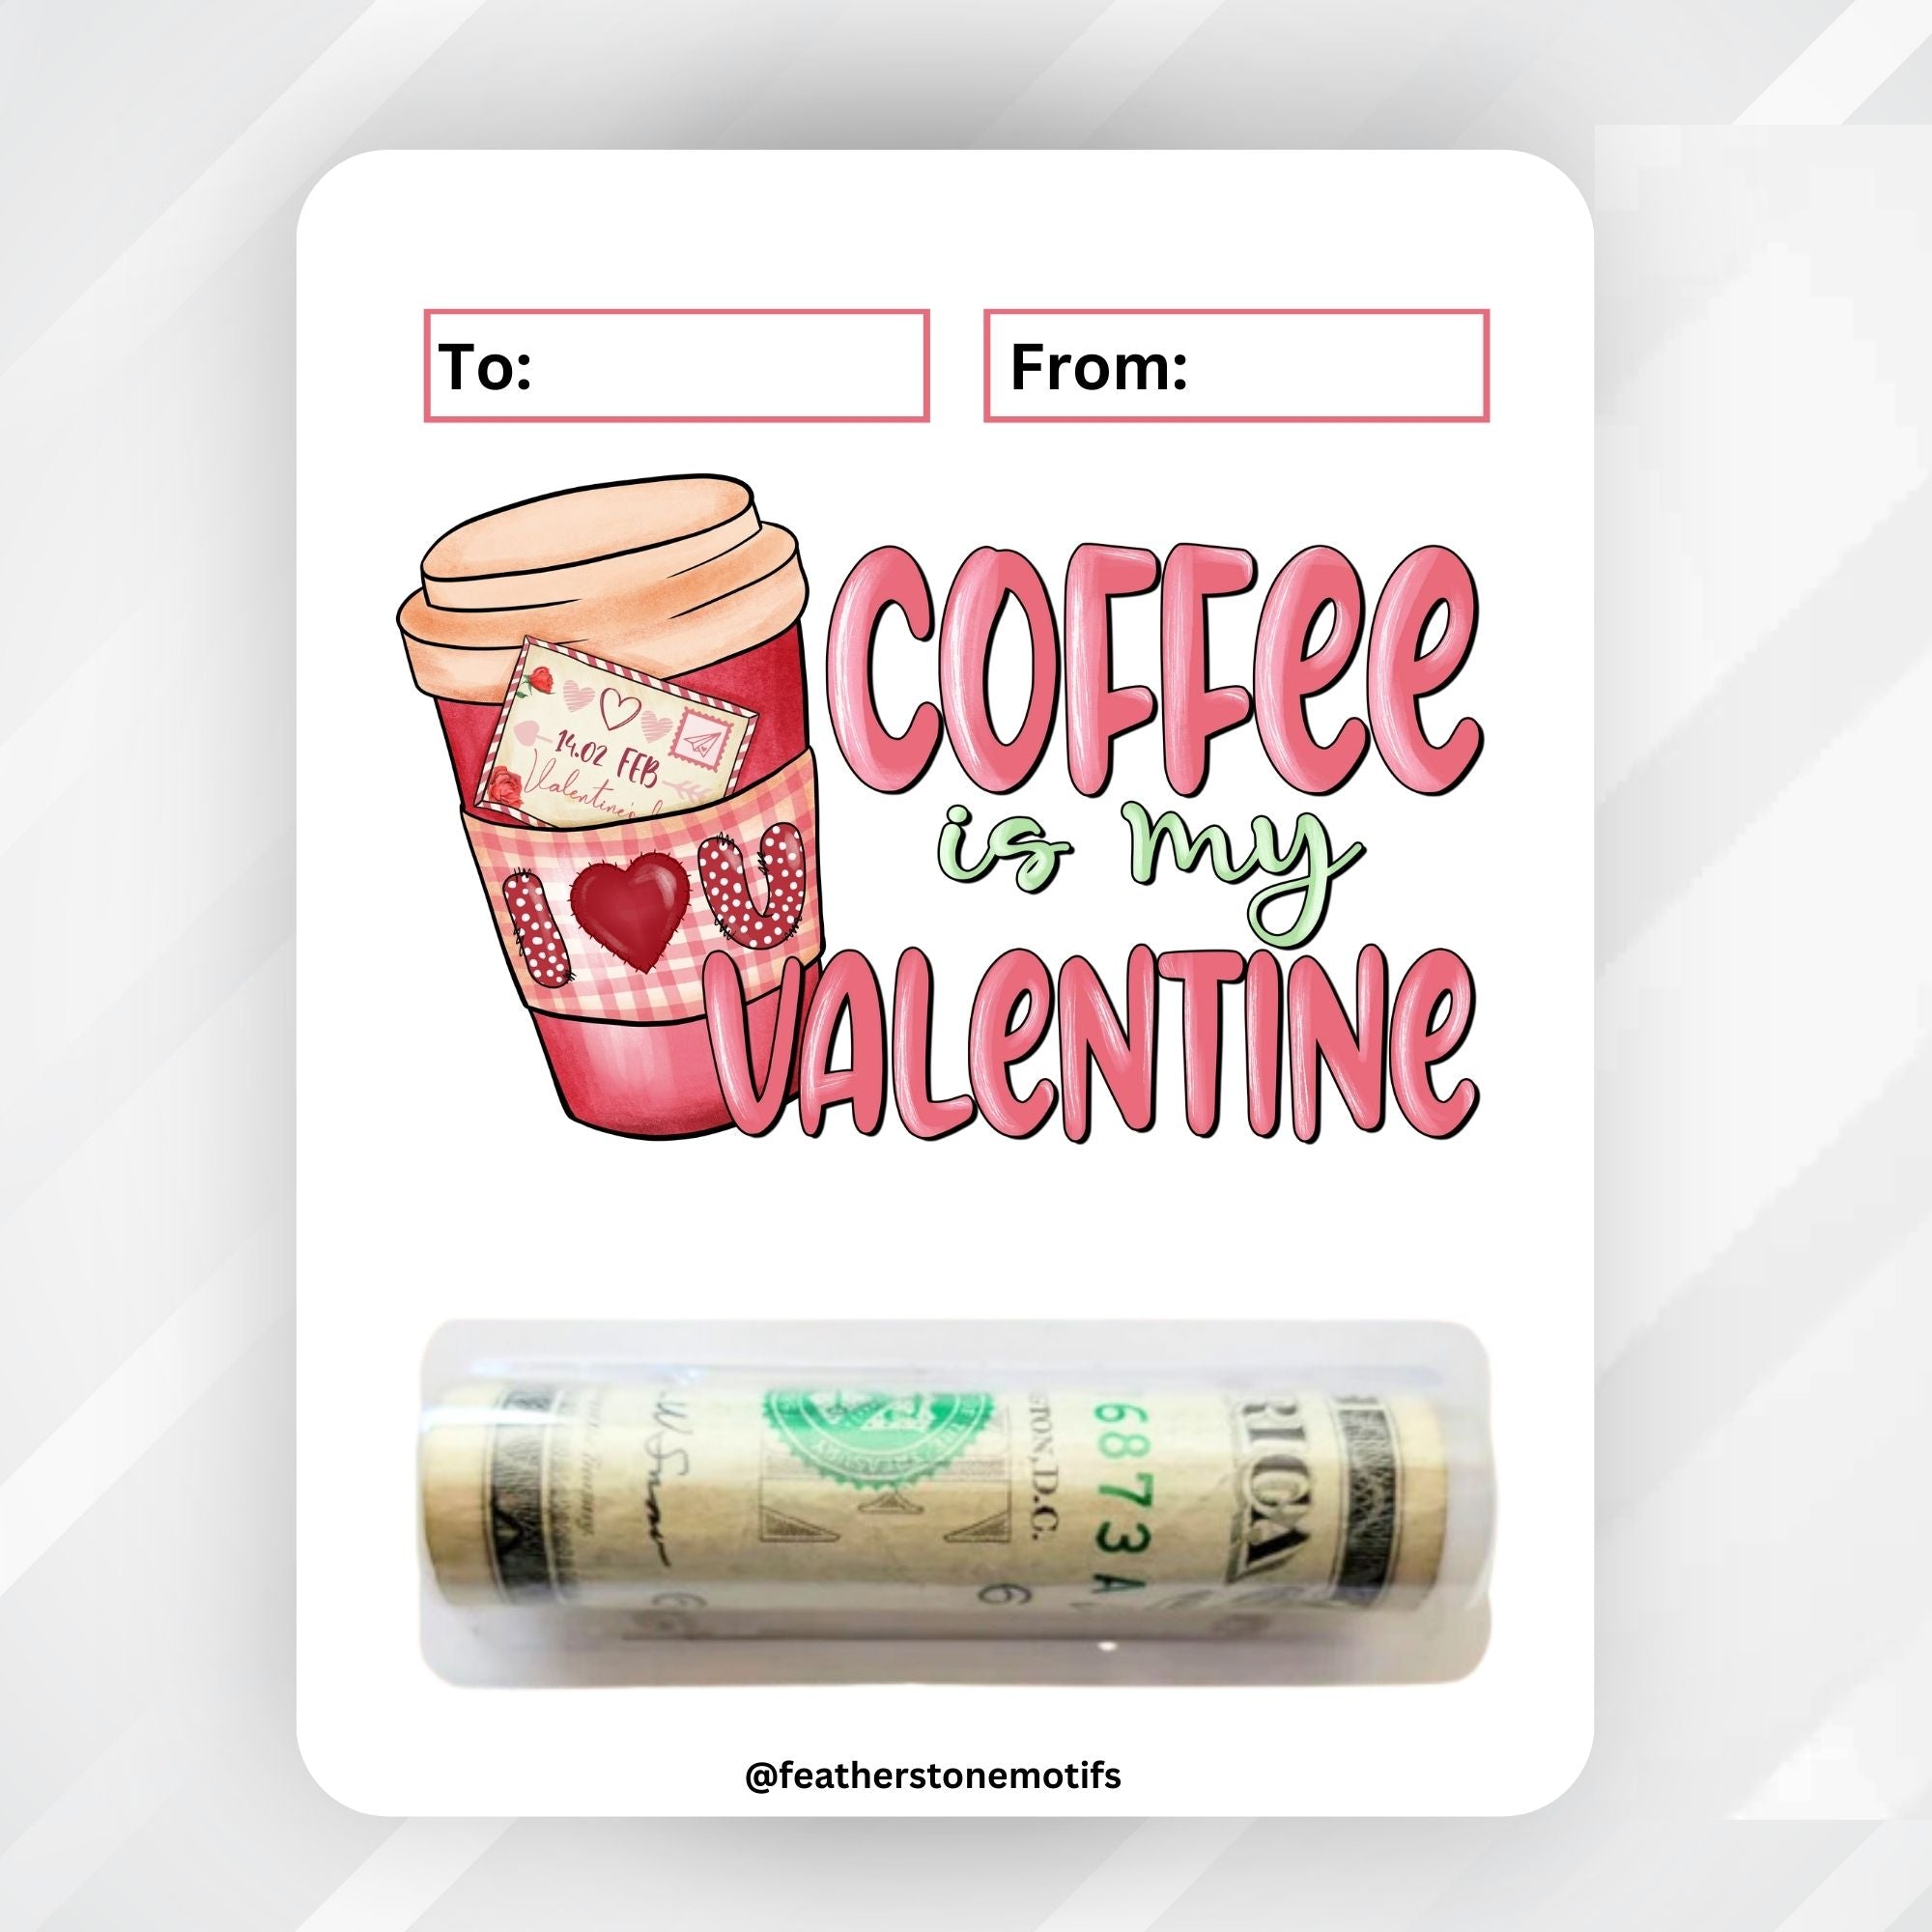 This image shows the money tube attached to the Coffee Valentine Money Card.